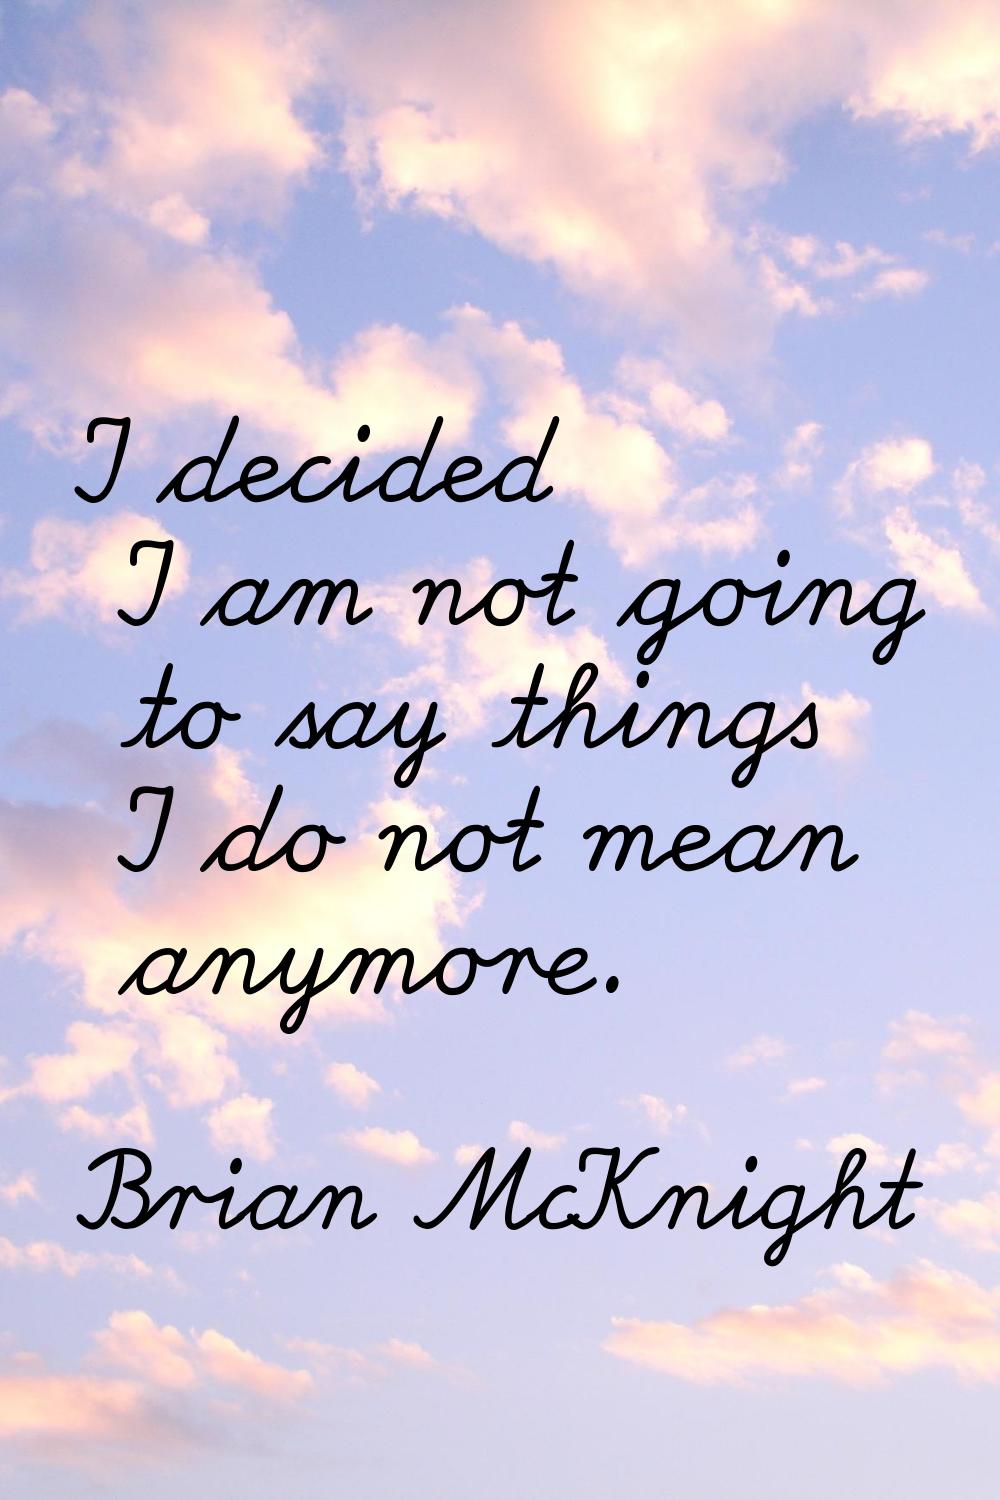 I decided I am not going to say things I do not mean anymore.